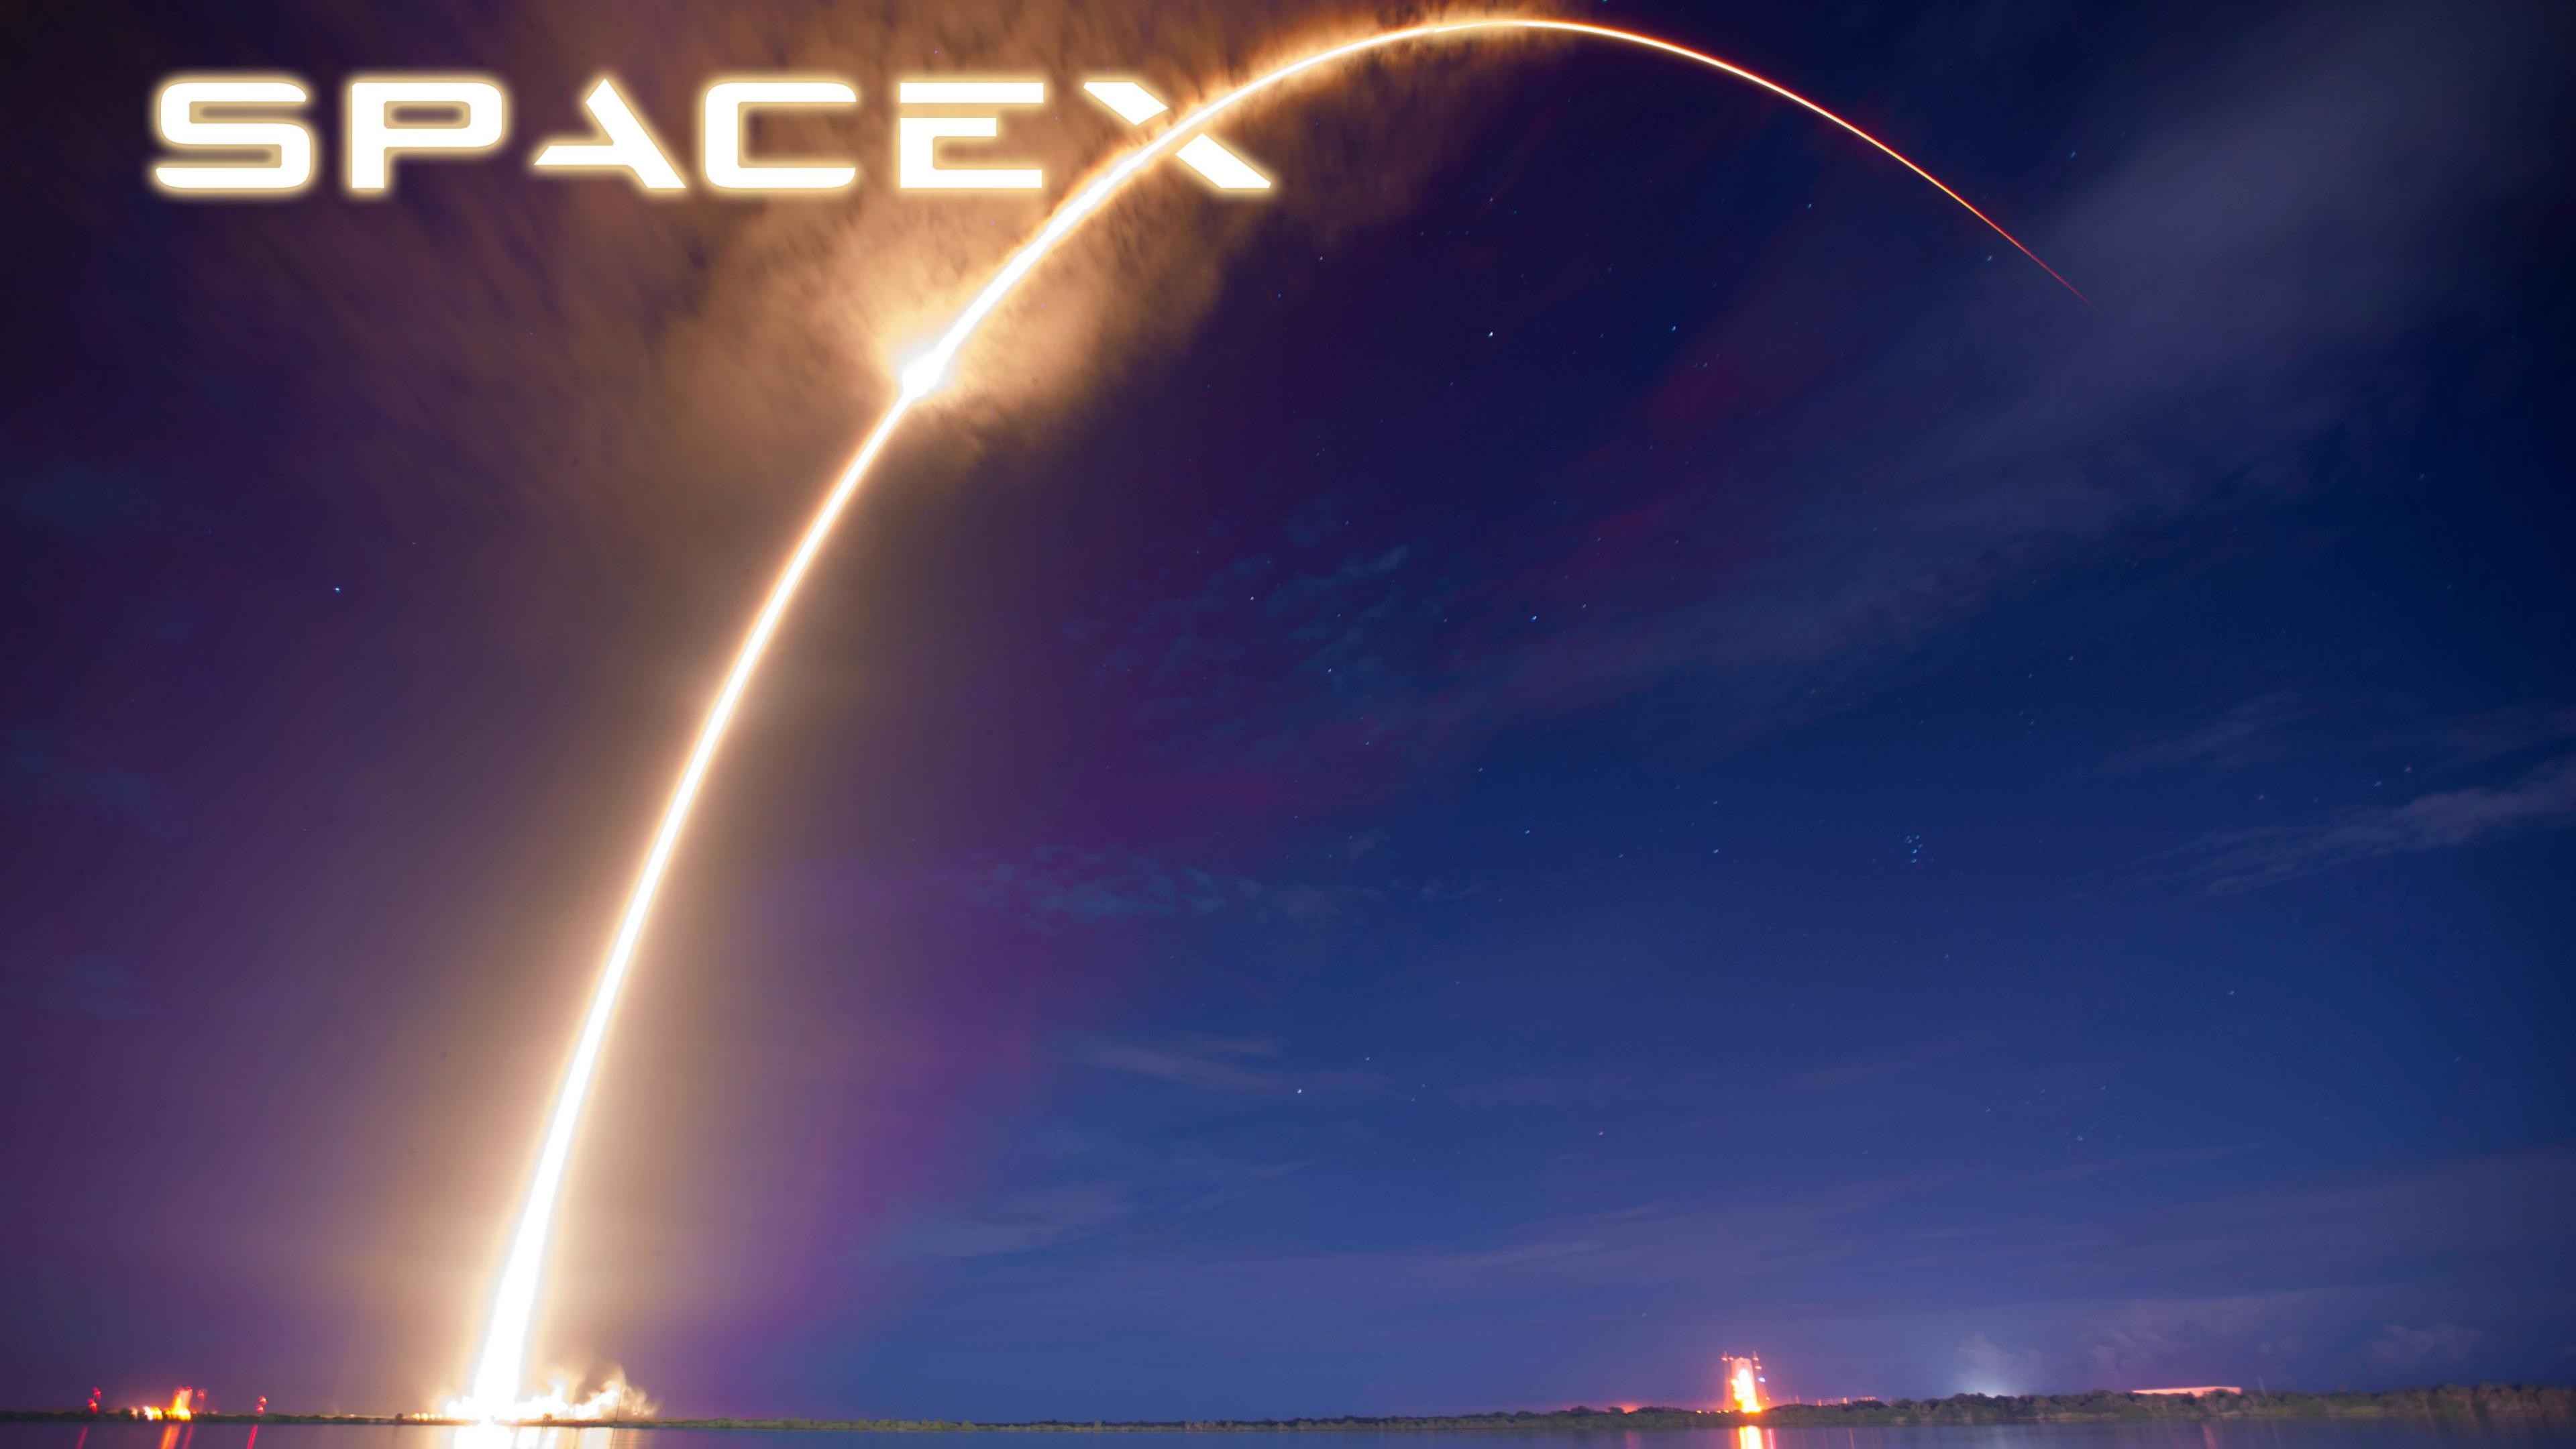 SpaceX, Space, Rockets, Launching Wallpaper